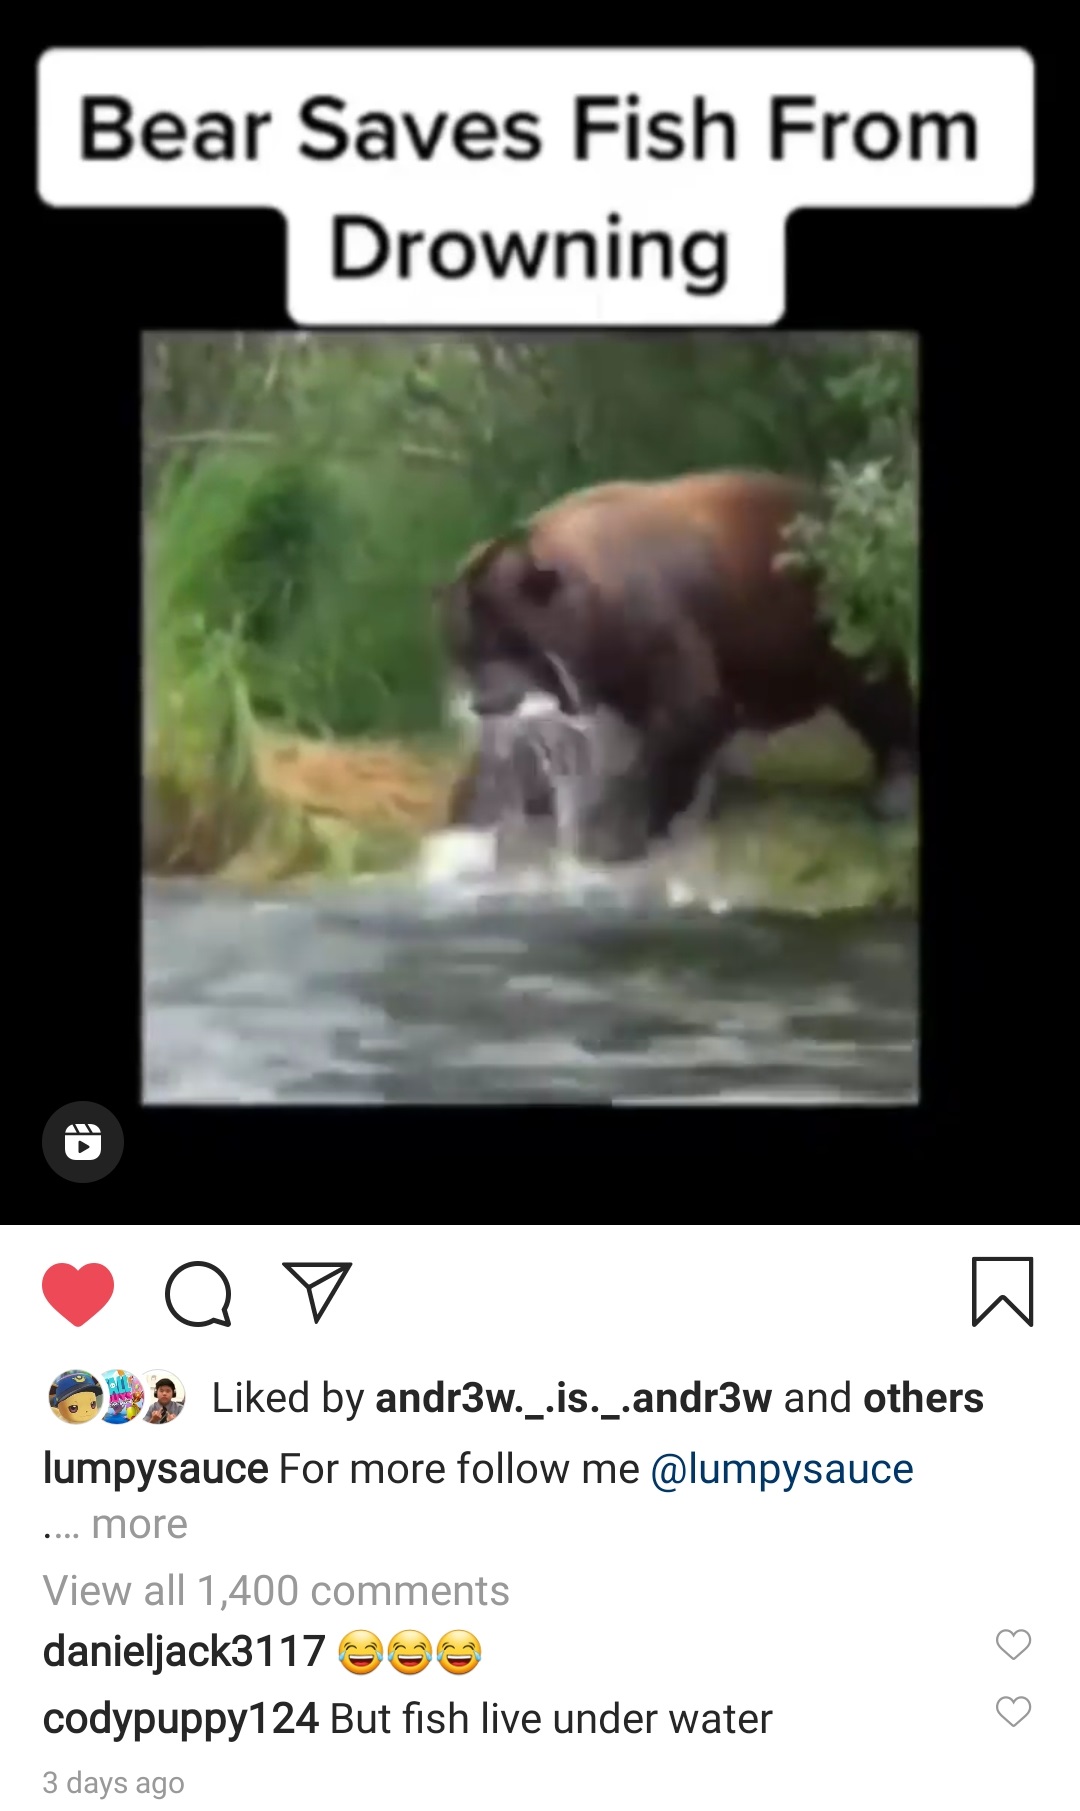 bear saves fish from drowning - Bear Saves Fish From Drowning Q B d by andr3w._.is._.andr3w and others lumpysauce For more me more View all 1,400 danieljack3117 codypuppy124 But fish live under water 3 days ago